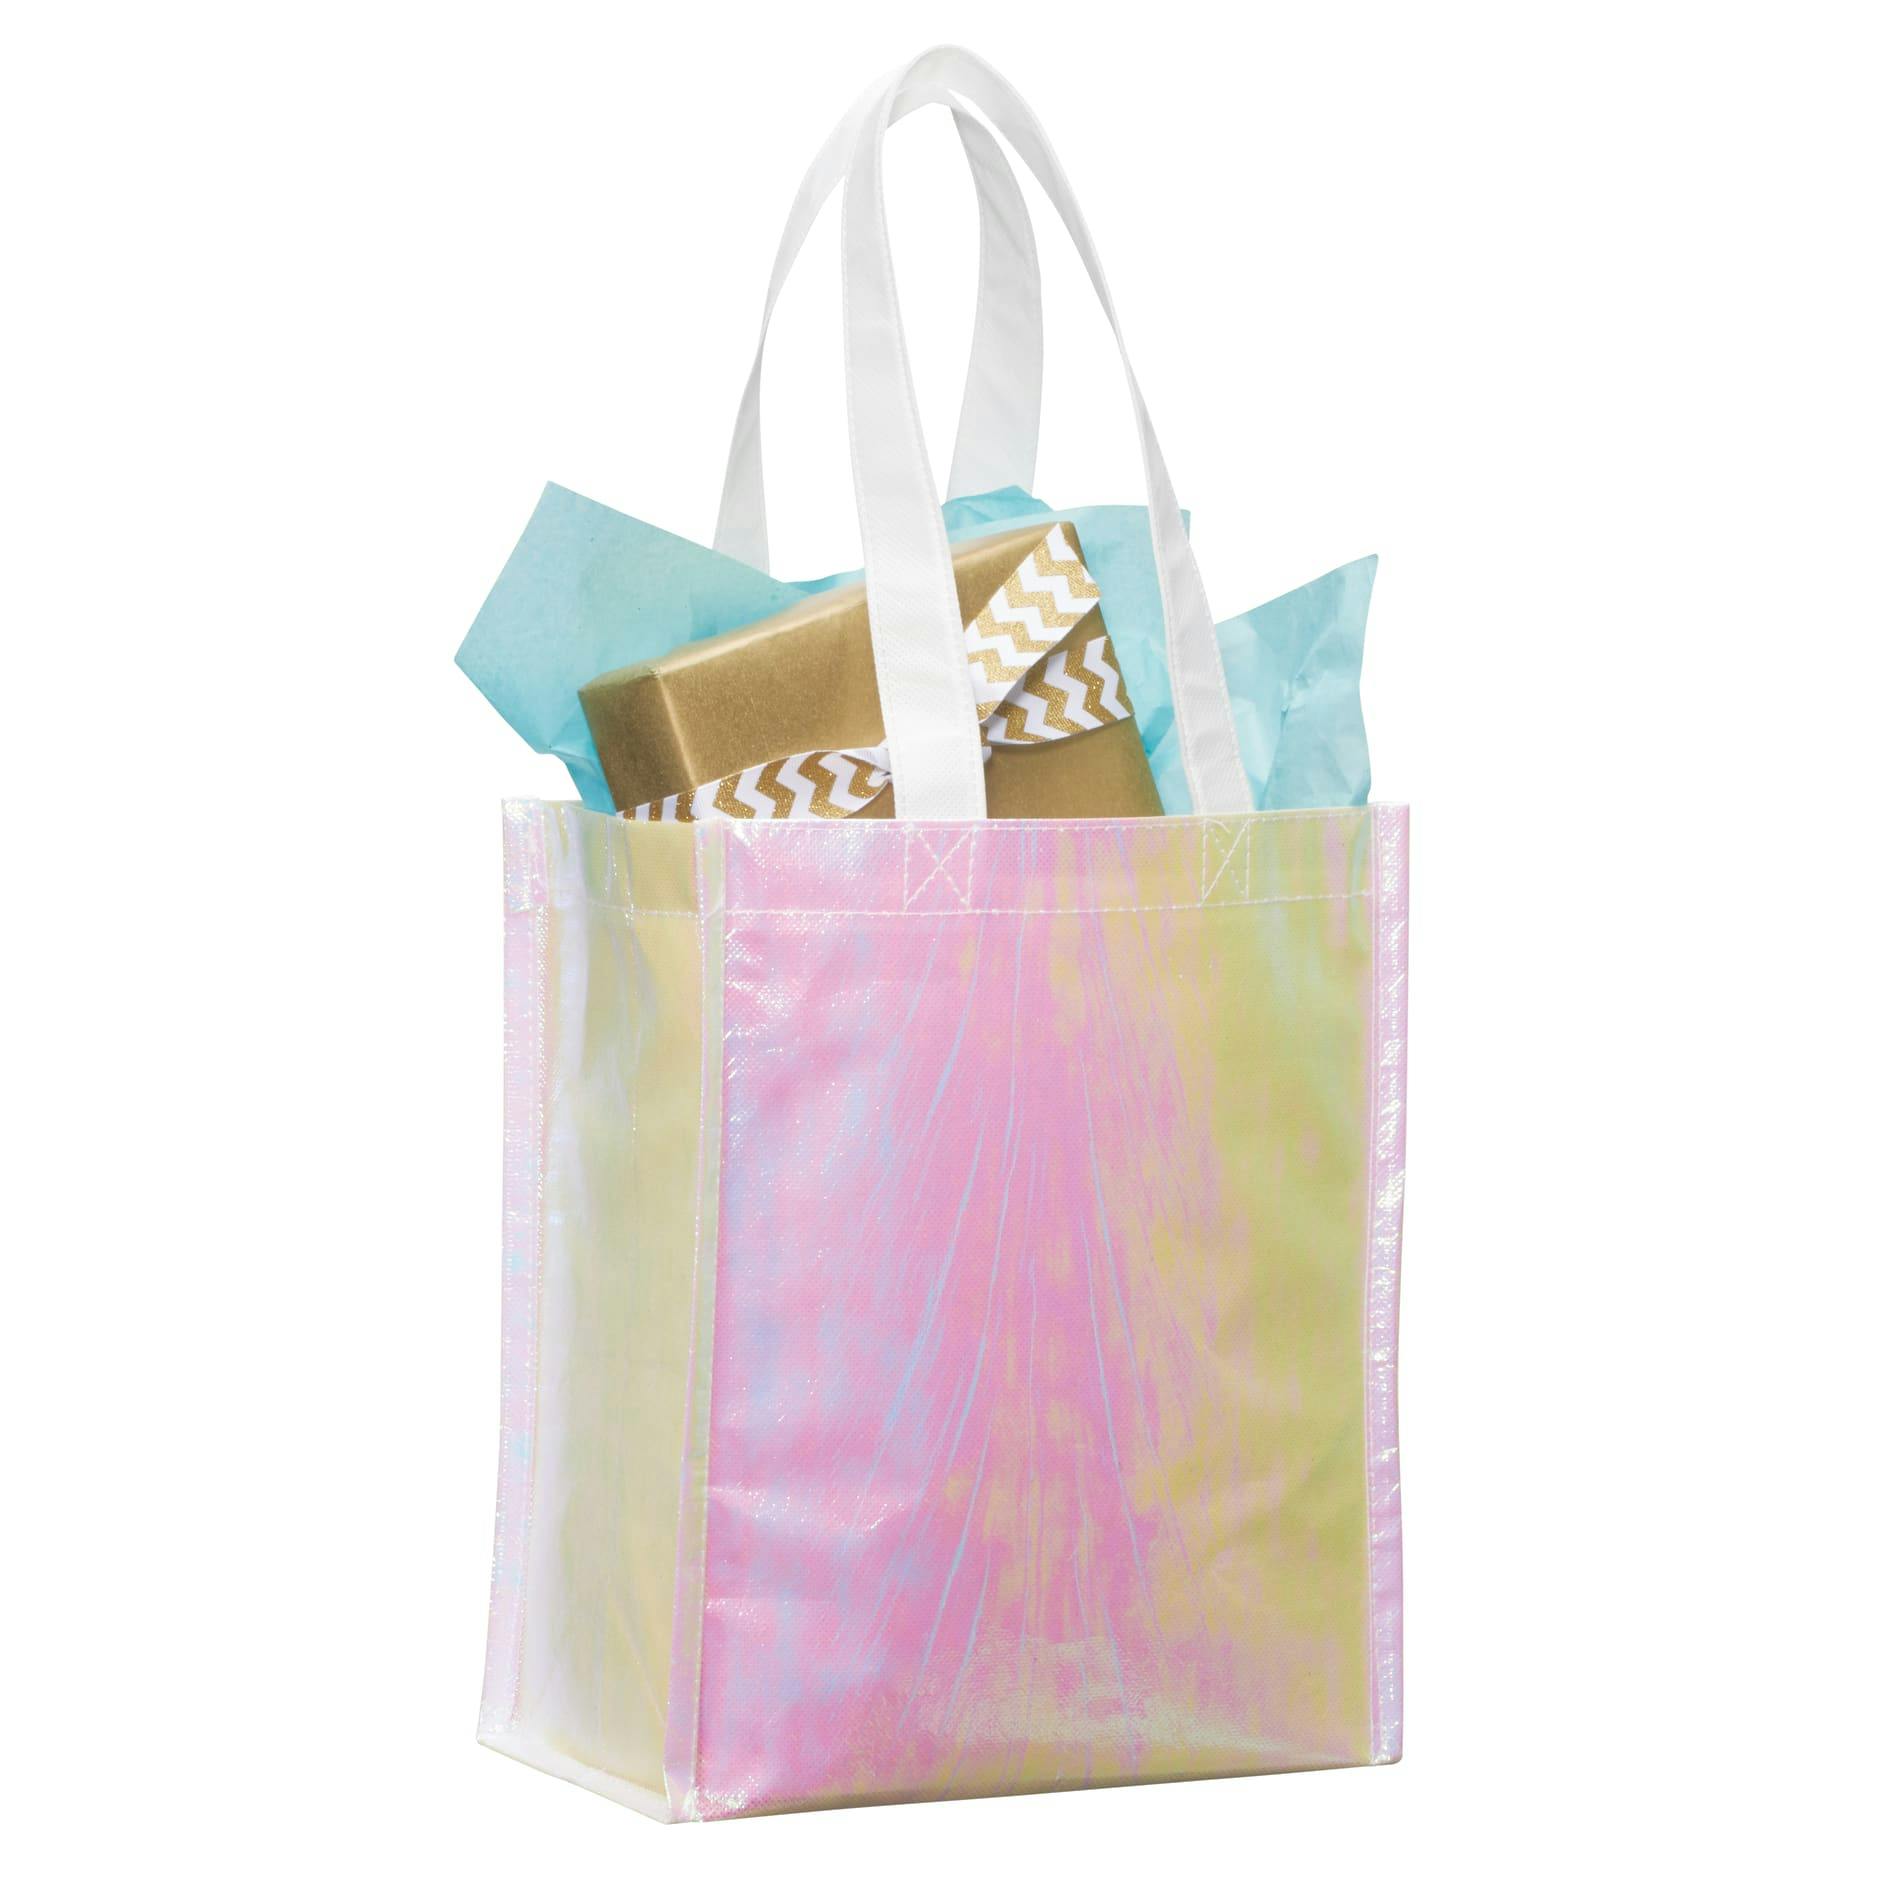 Iridescent Non-Woven Gift Tote - additional Image 4